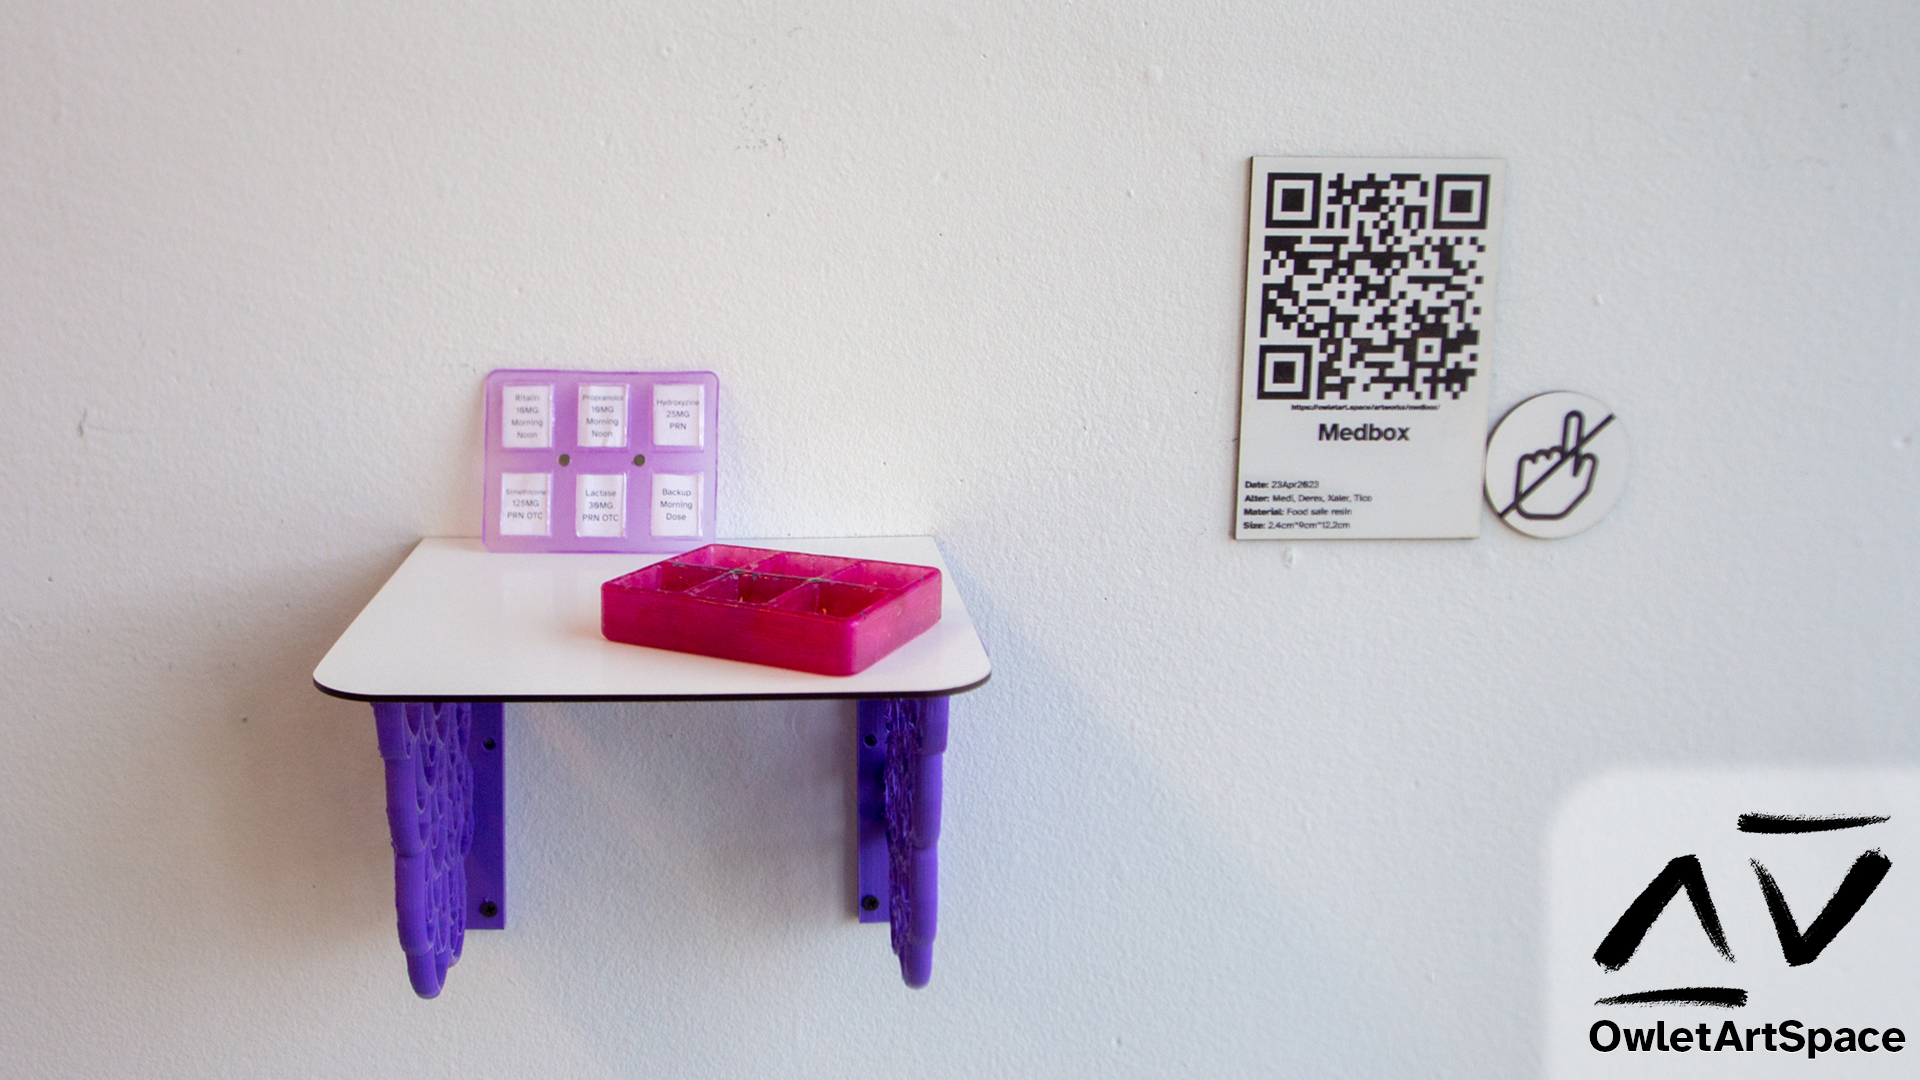 The medbox displayed open on a shelf. Next to it is a wall label with a QR code to the page you are currently reading.